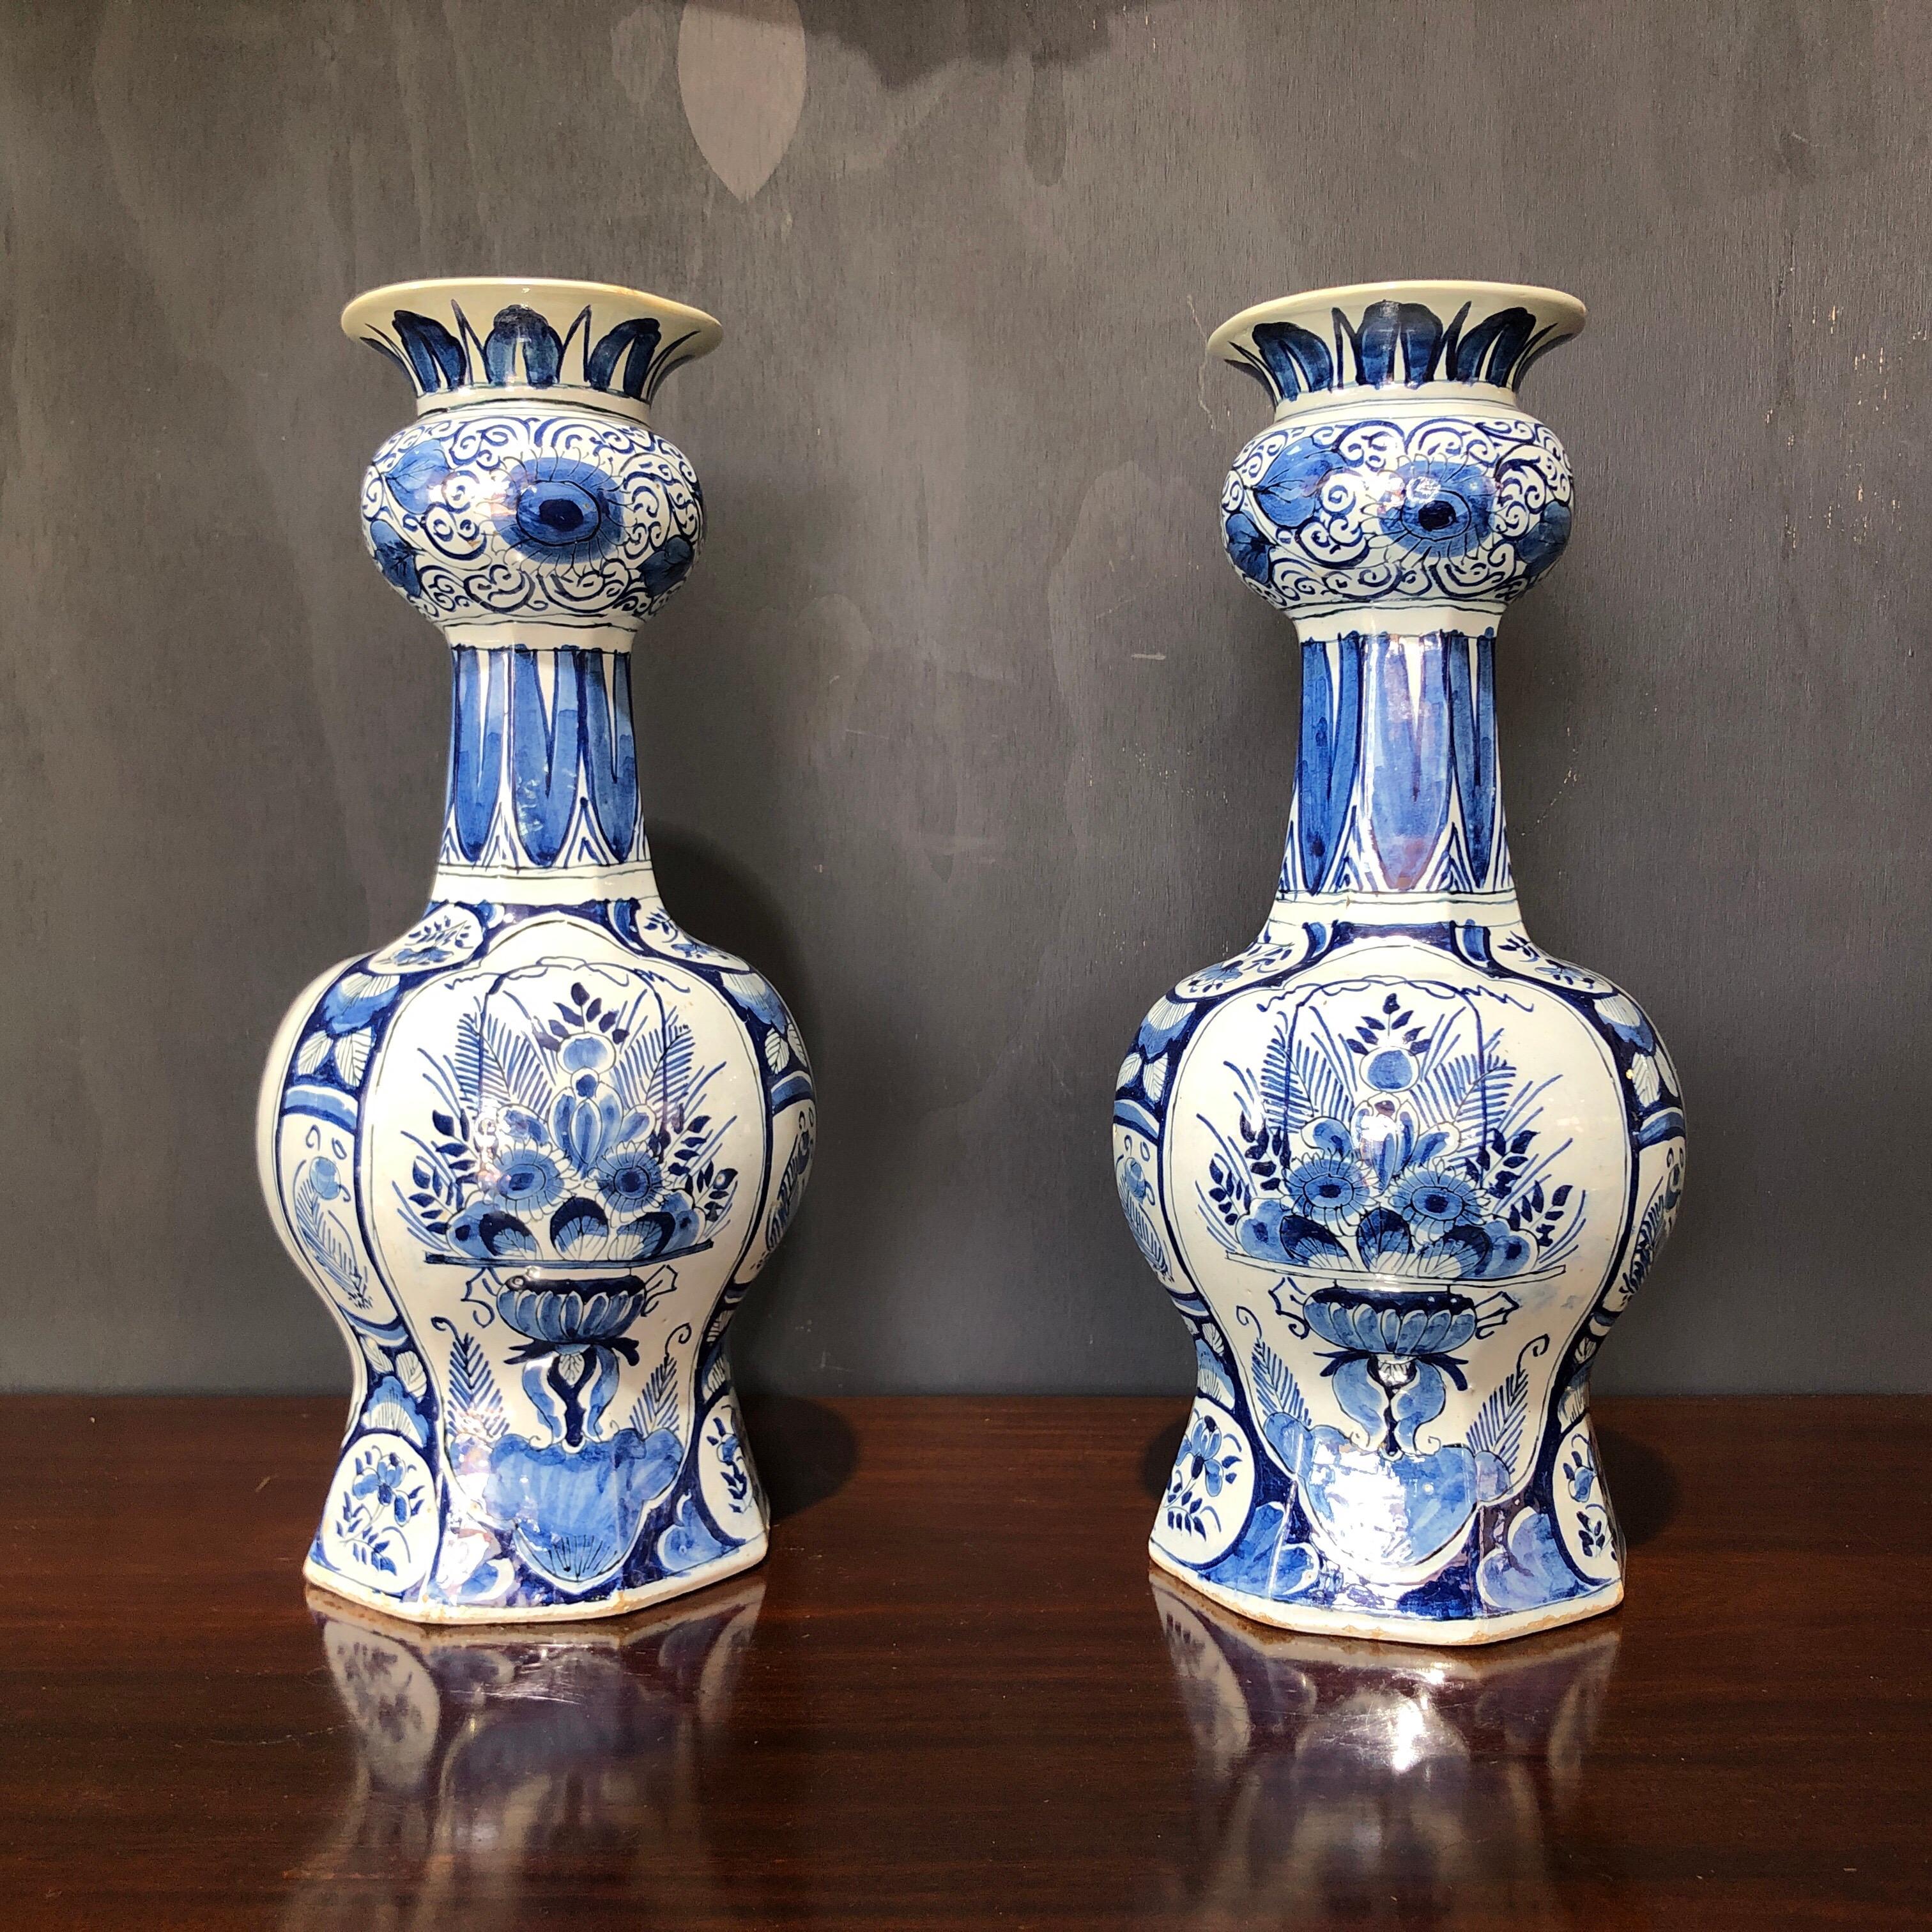 European Large Pair of Dutch Delft Vases, Early 18th Century